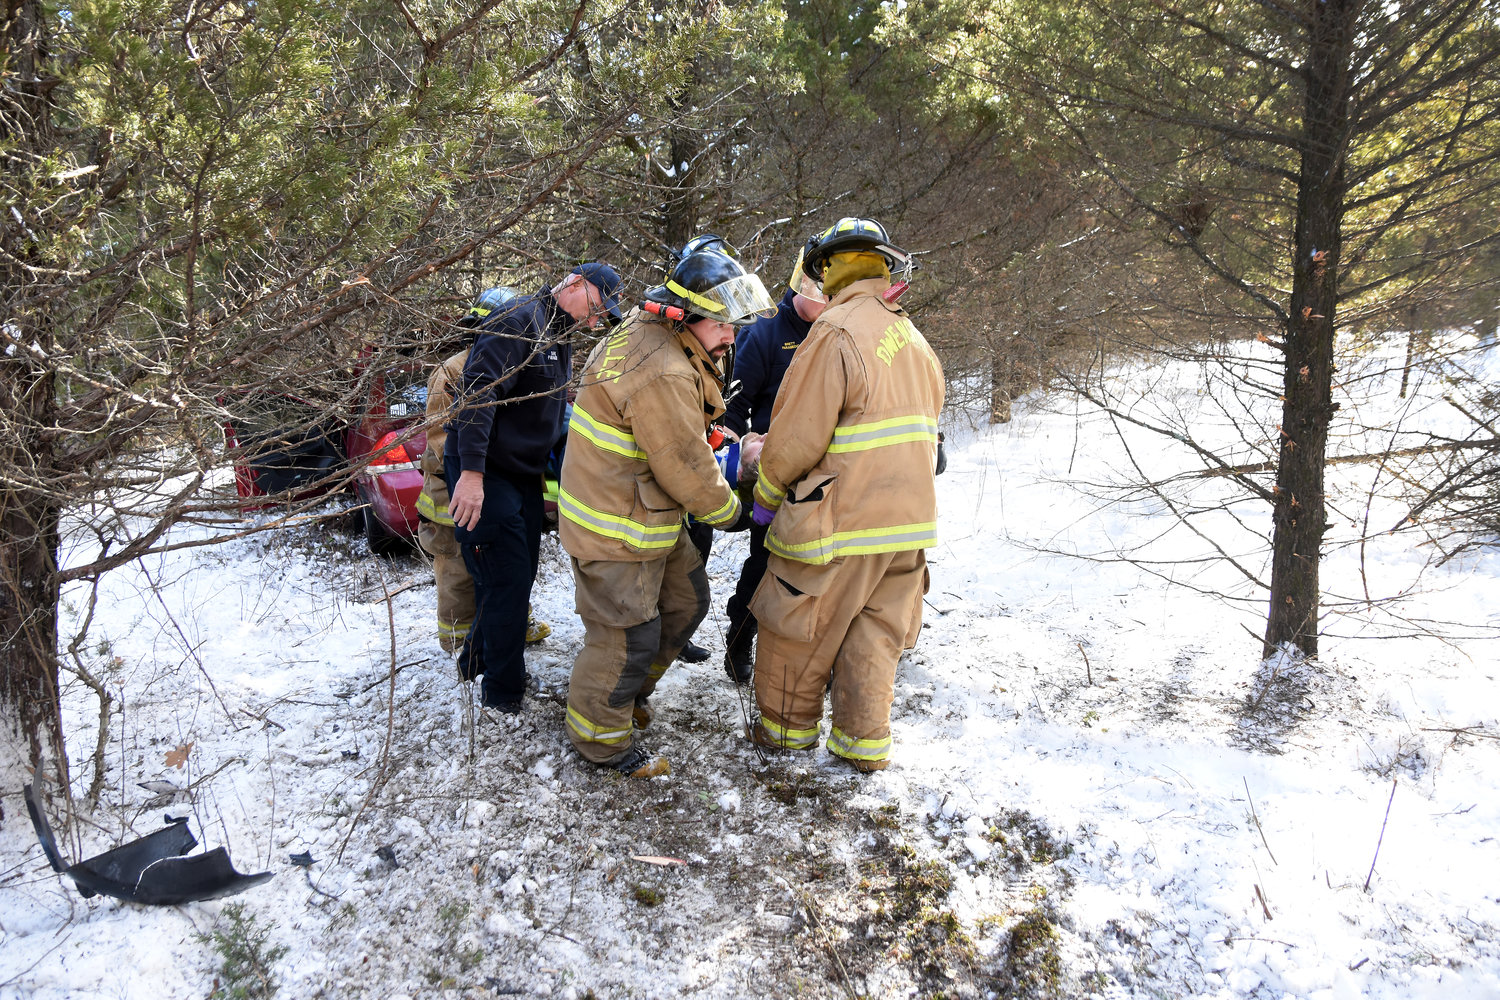 FIREMEN AND ambulance personnel carry out an injured Sullivan man following the crash.